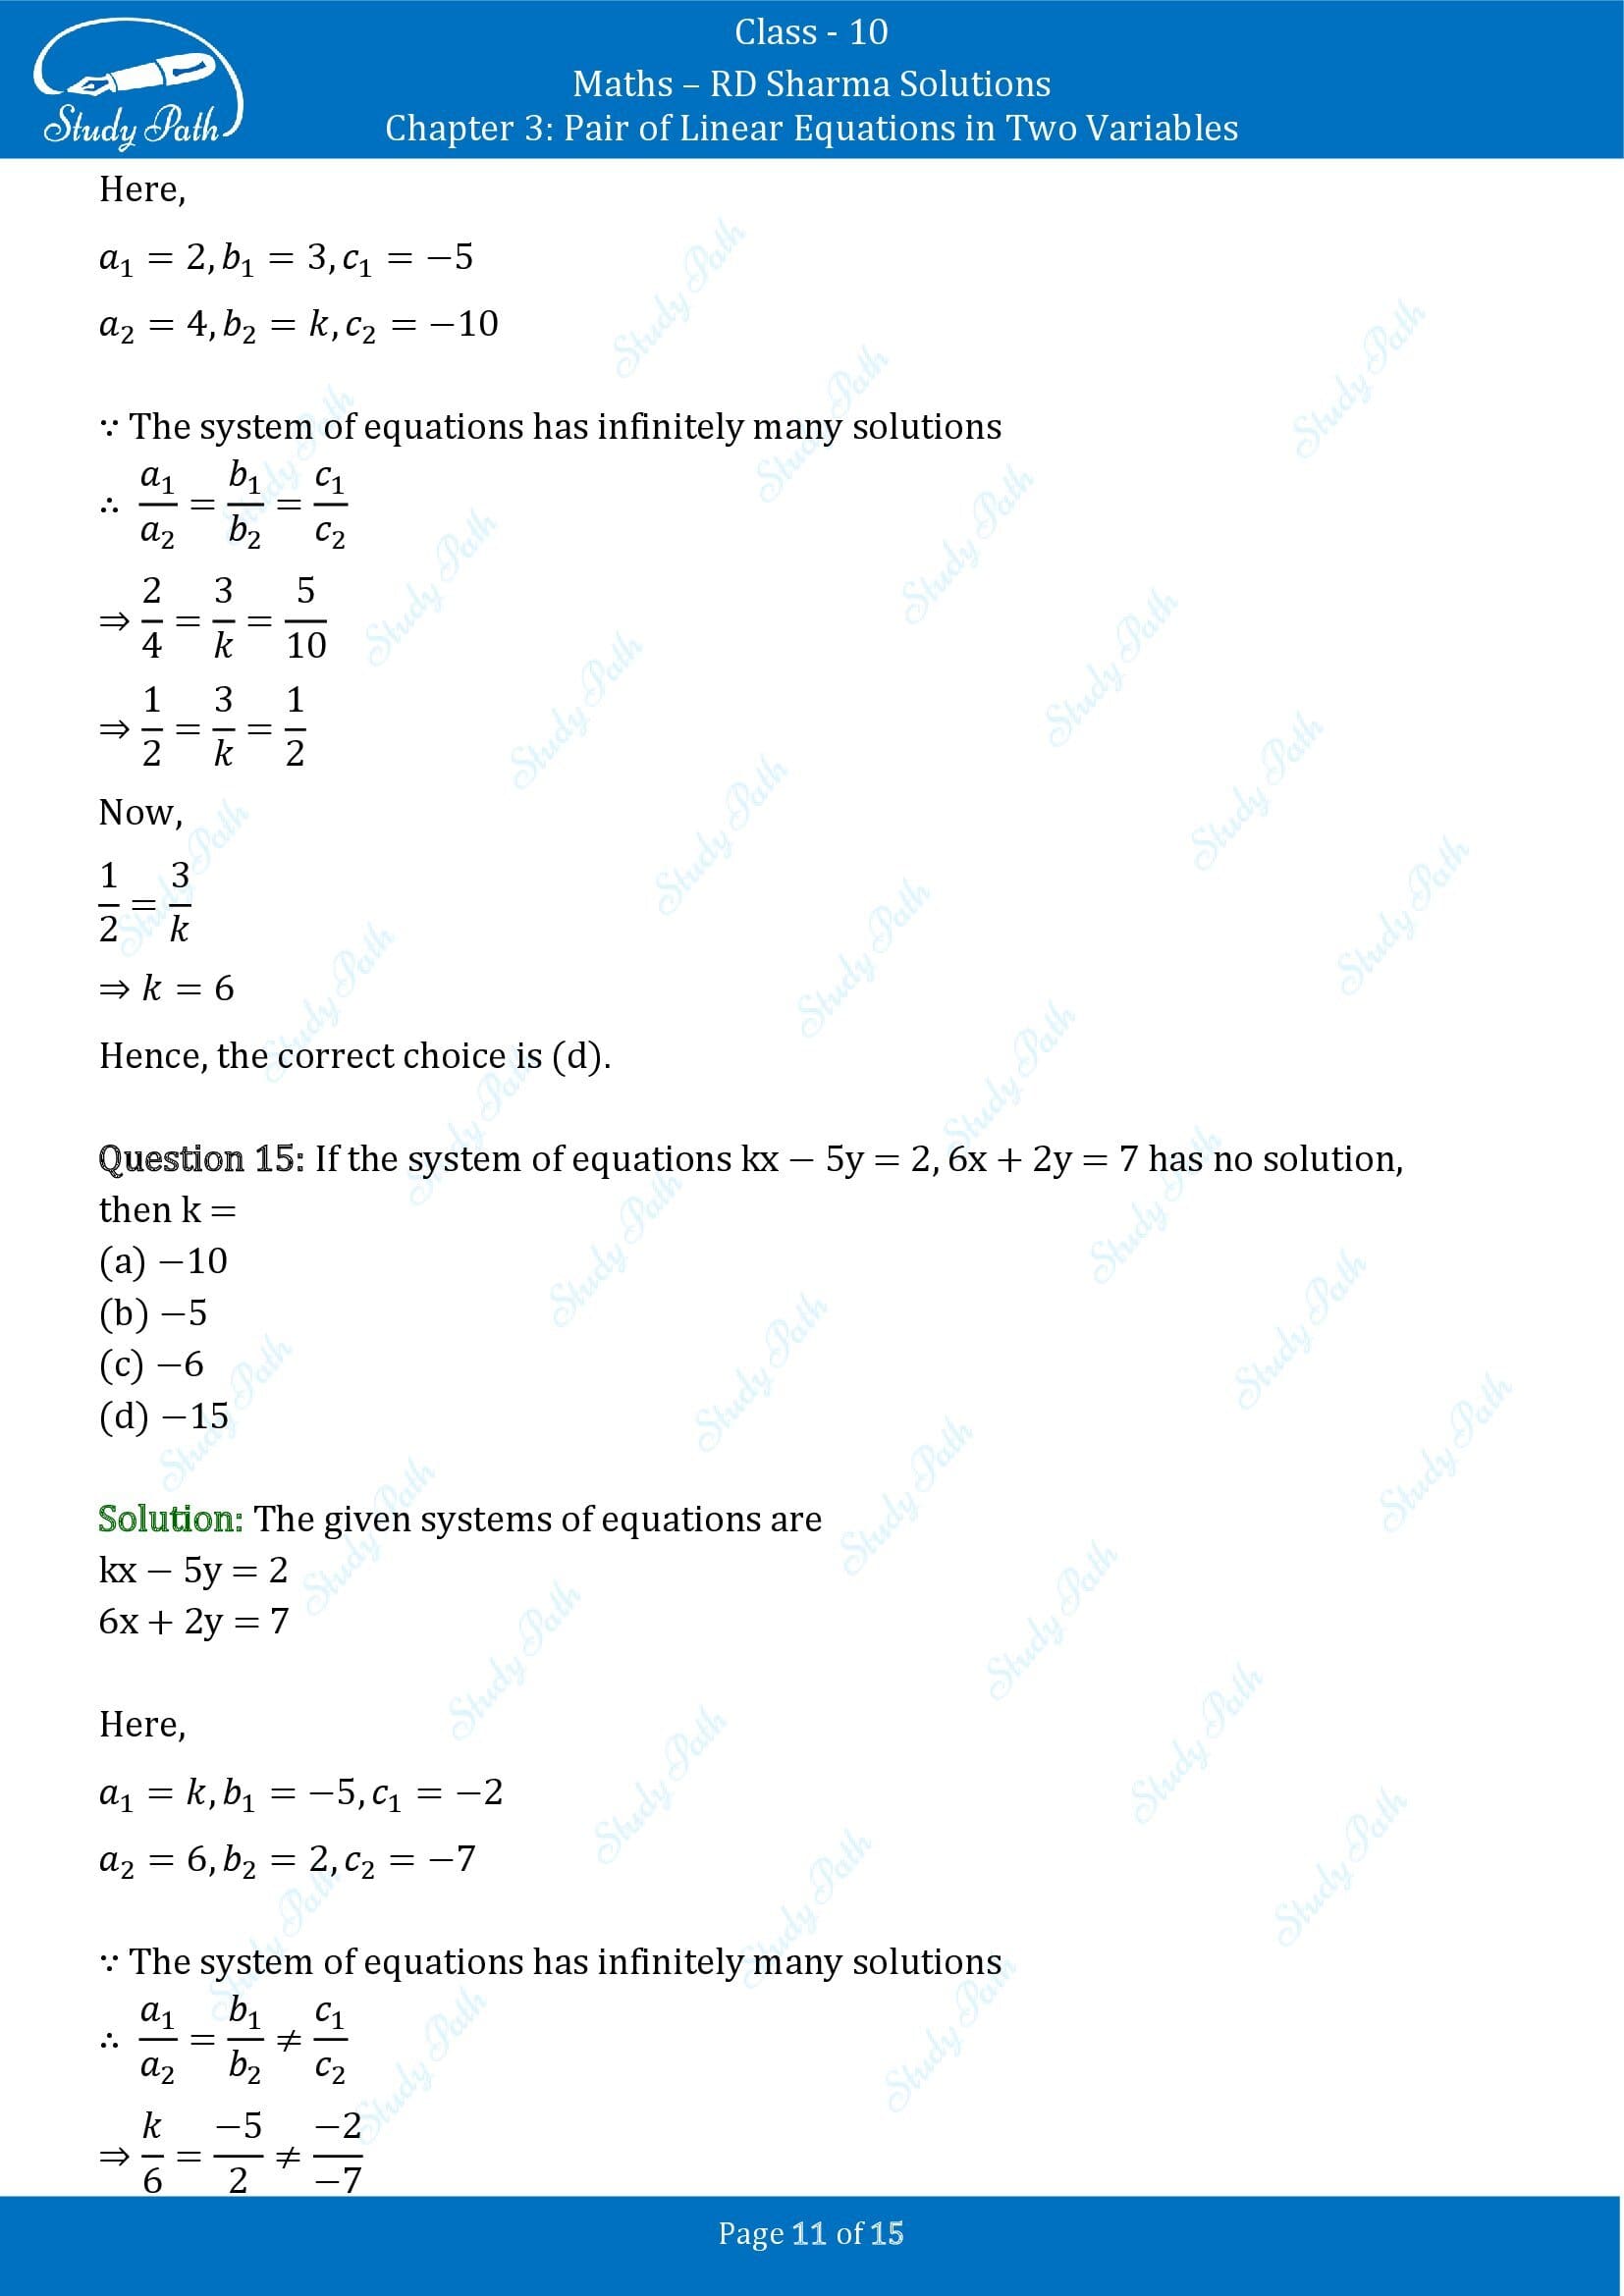 RD Sharma Solutions Class 10 Chapter 3 Pair of Linear Equations in Two Variables Multiple Choice Questions MCQs 00011